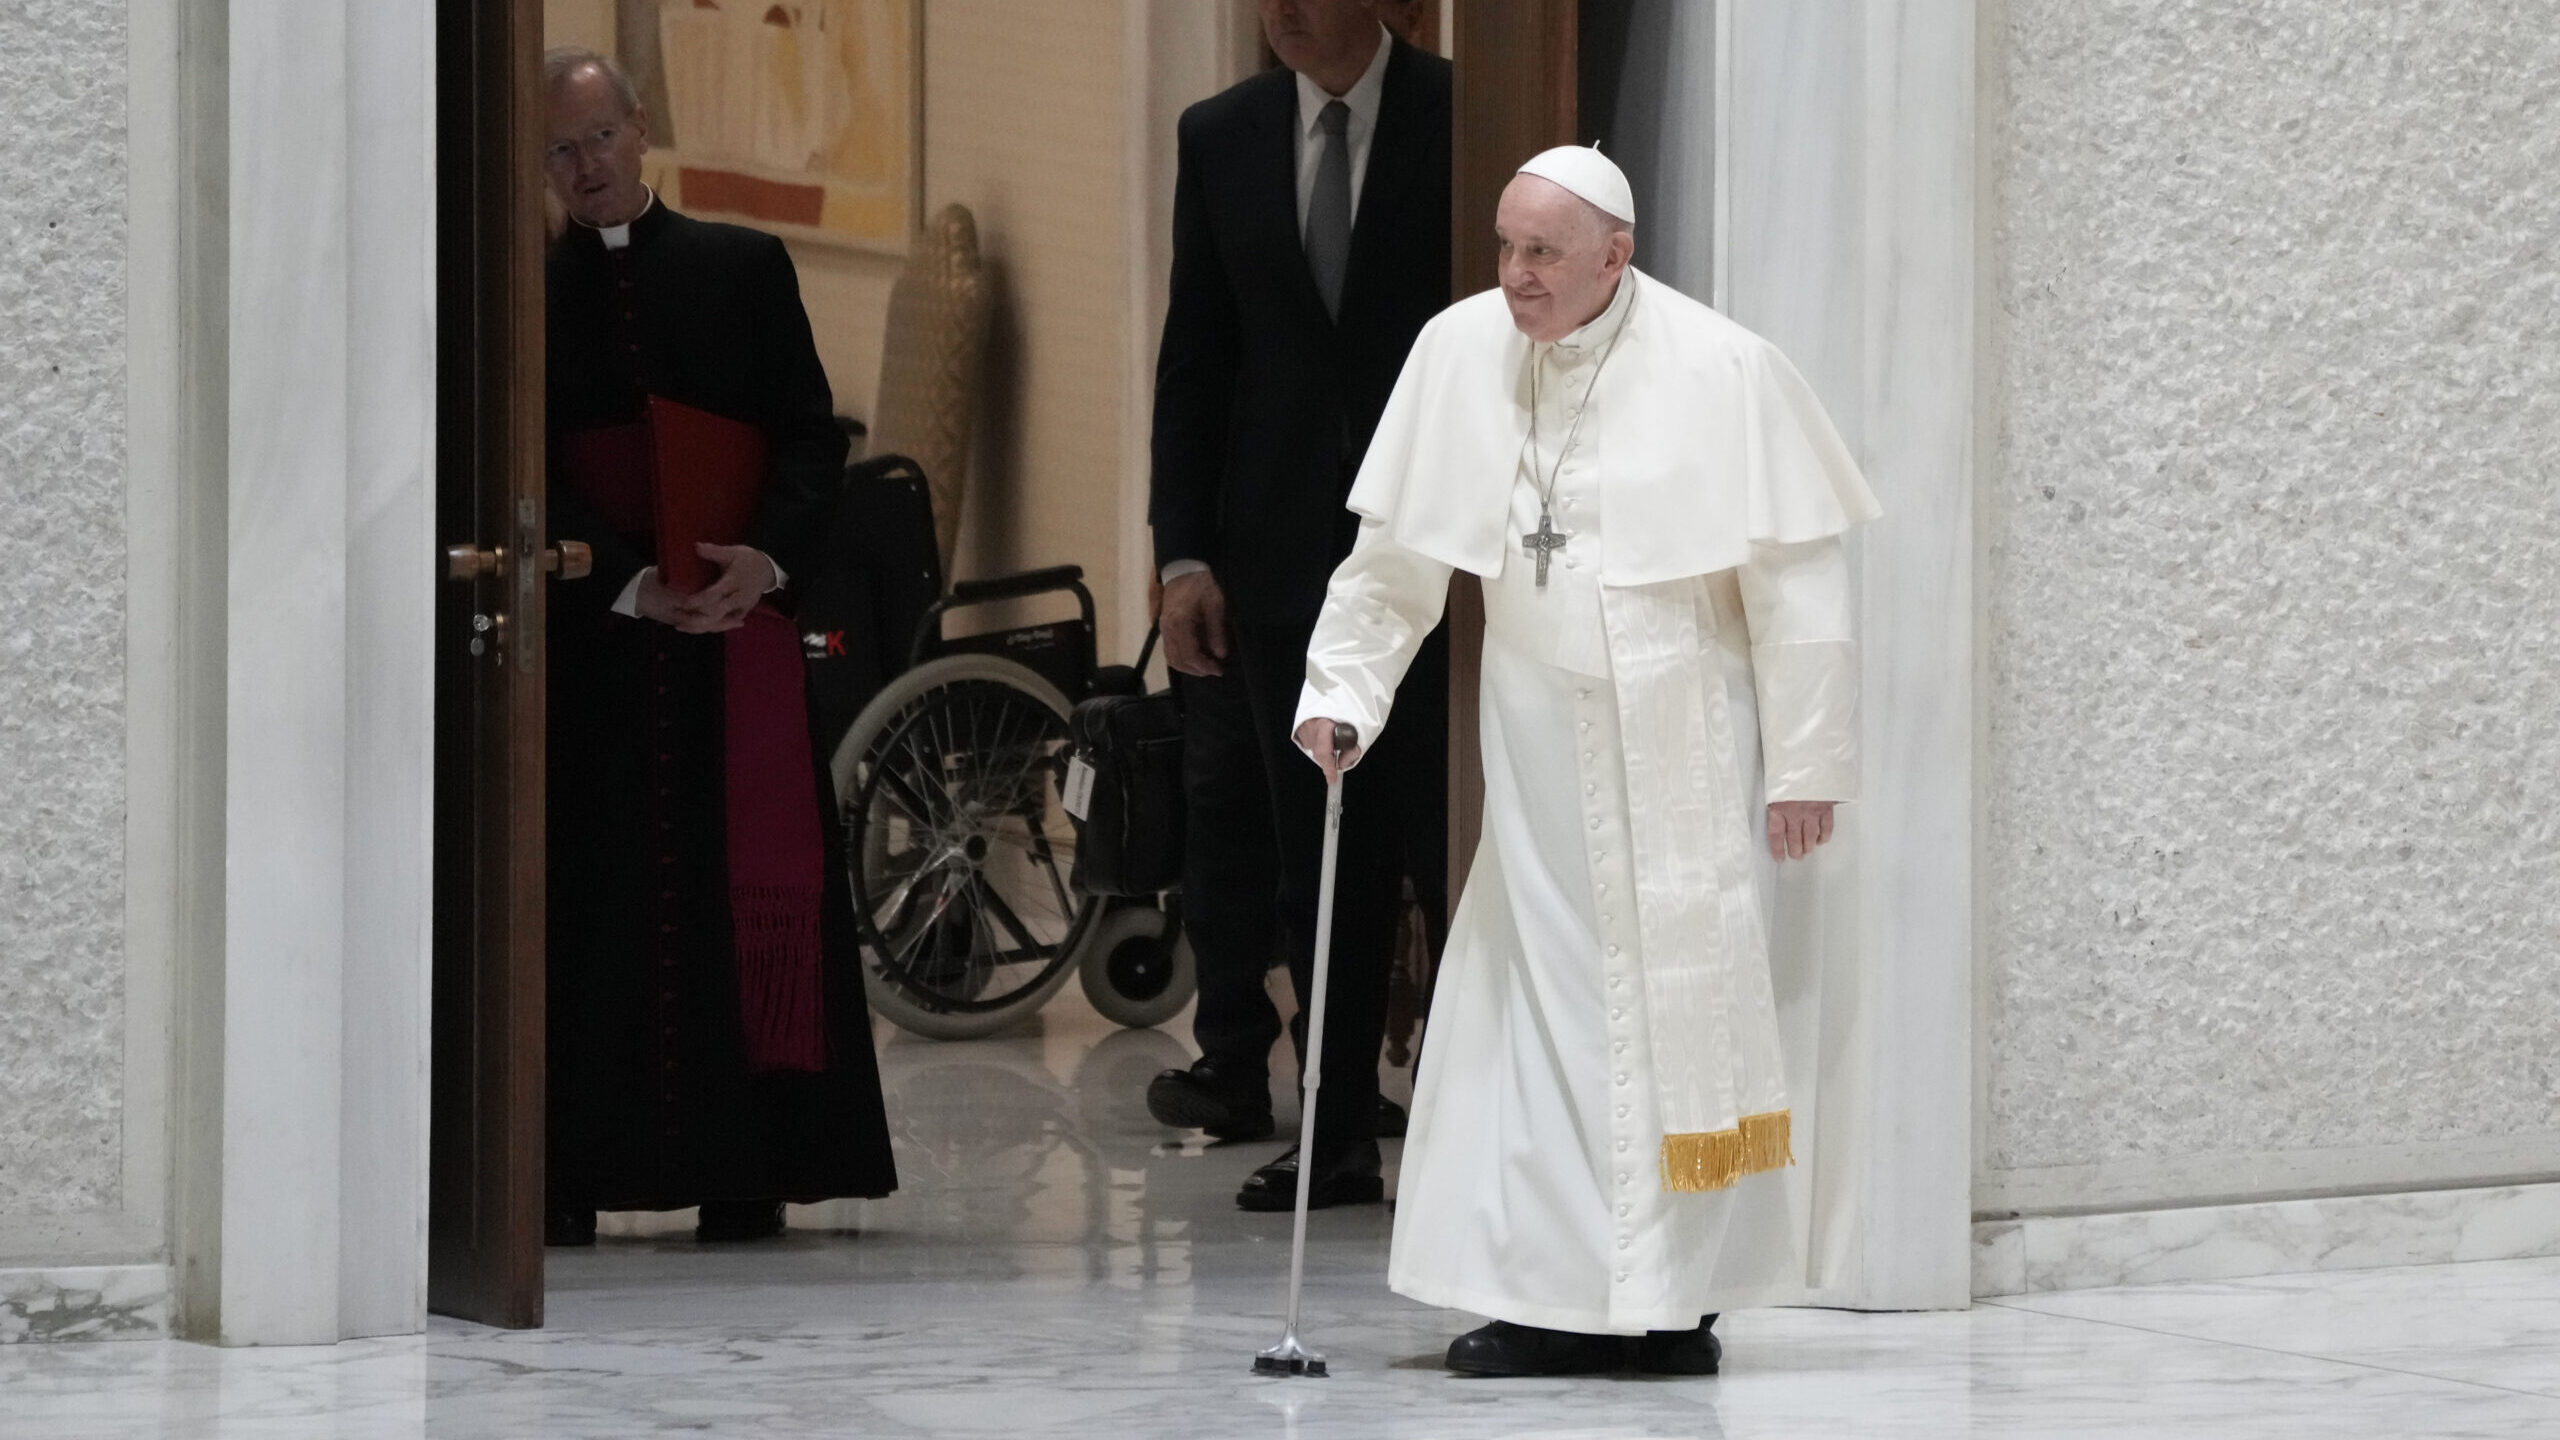 The Vatican says Pope Francis will be hospitalized for several days for treatment of a pulmonary in...